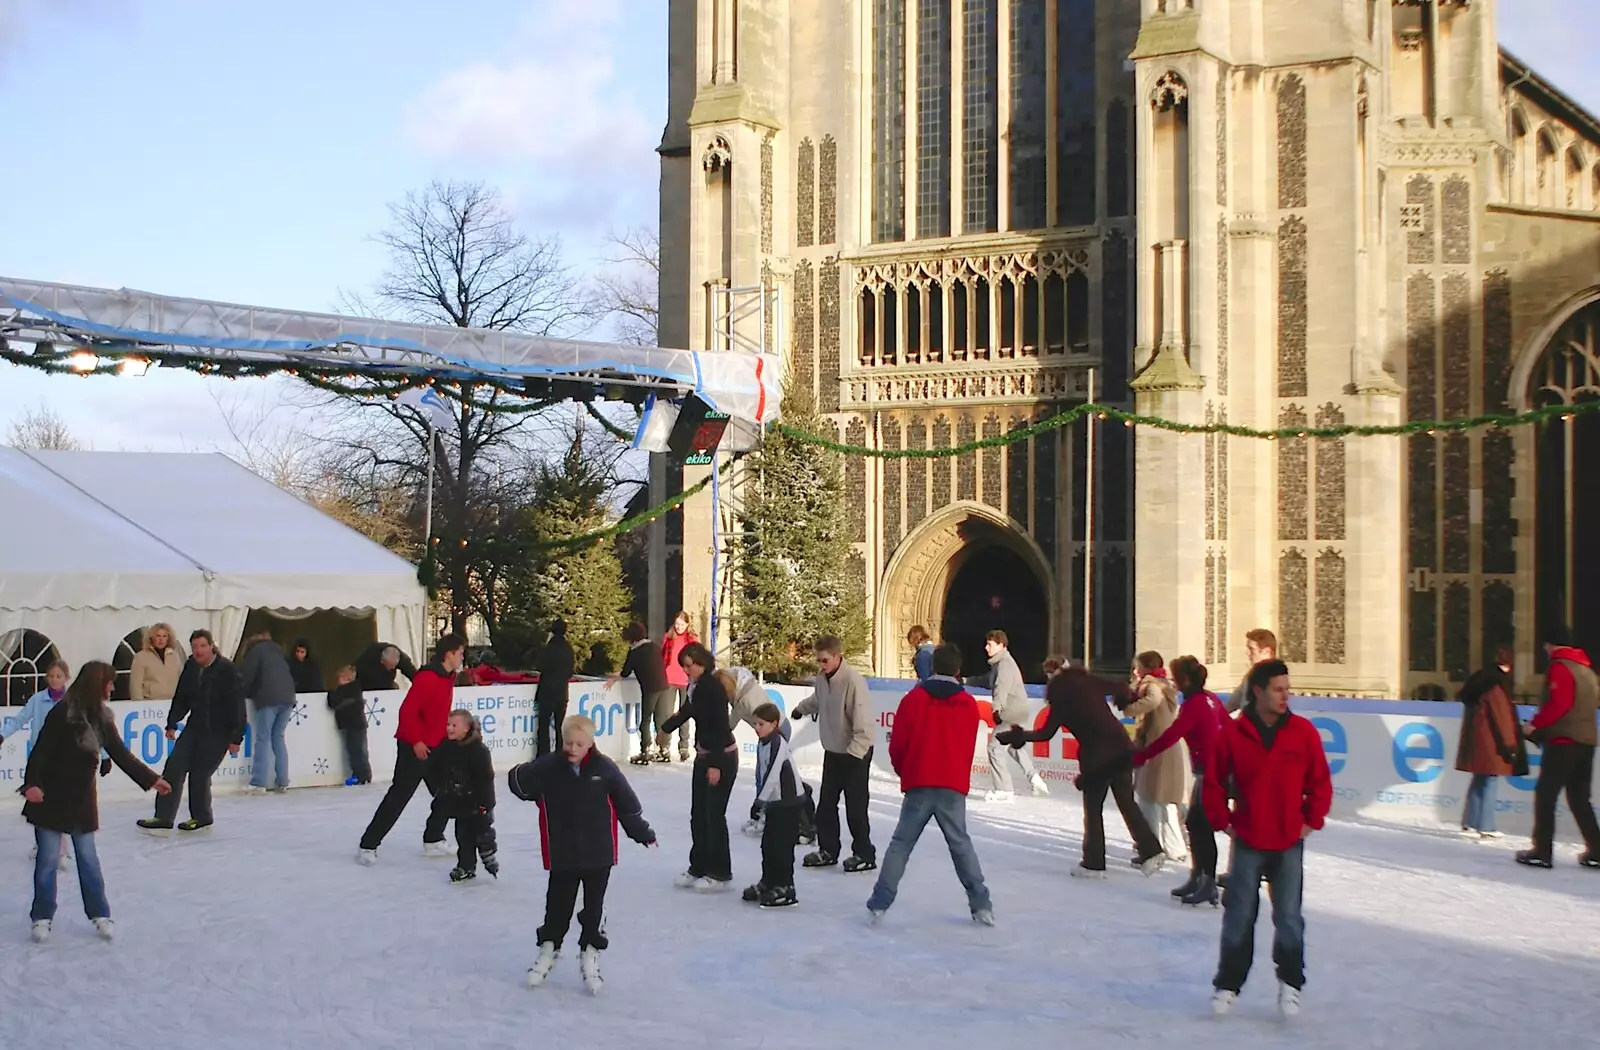 Skaters outside St. Peter Mancroft, from Christmas Shopping and a Carol Service, Norwich and Thrandeston - 19th December 2004